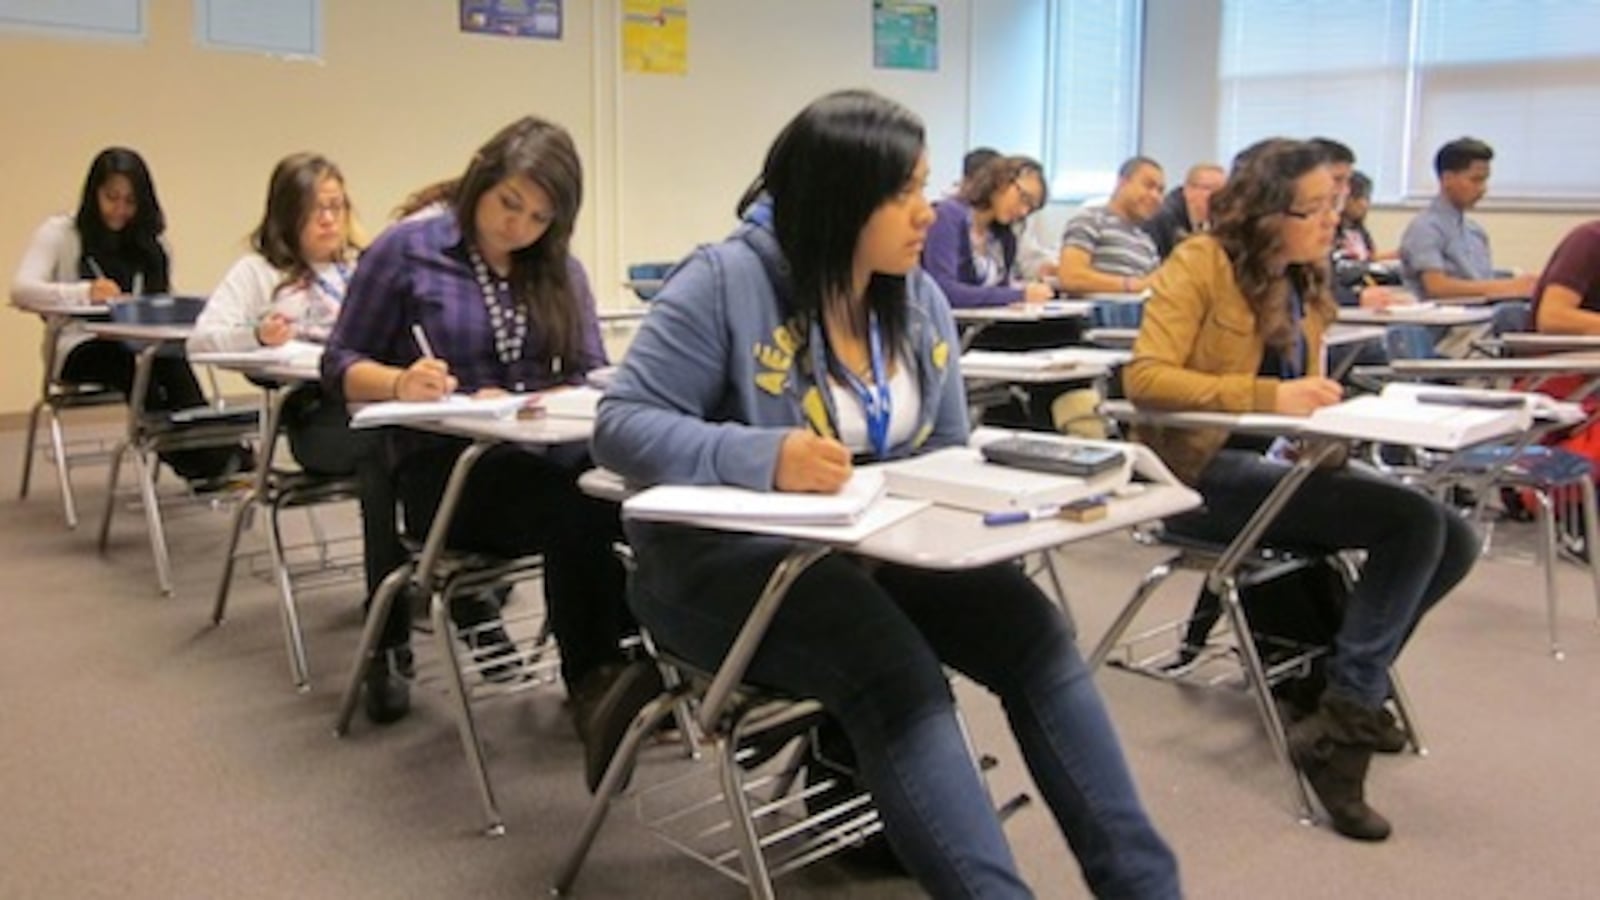 Students work on algebra problems in a college-level course at Hinkley High School in Aurora.